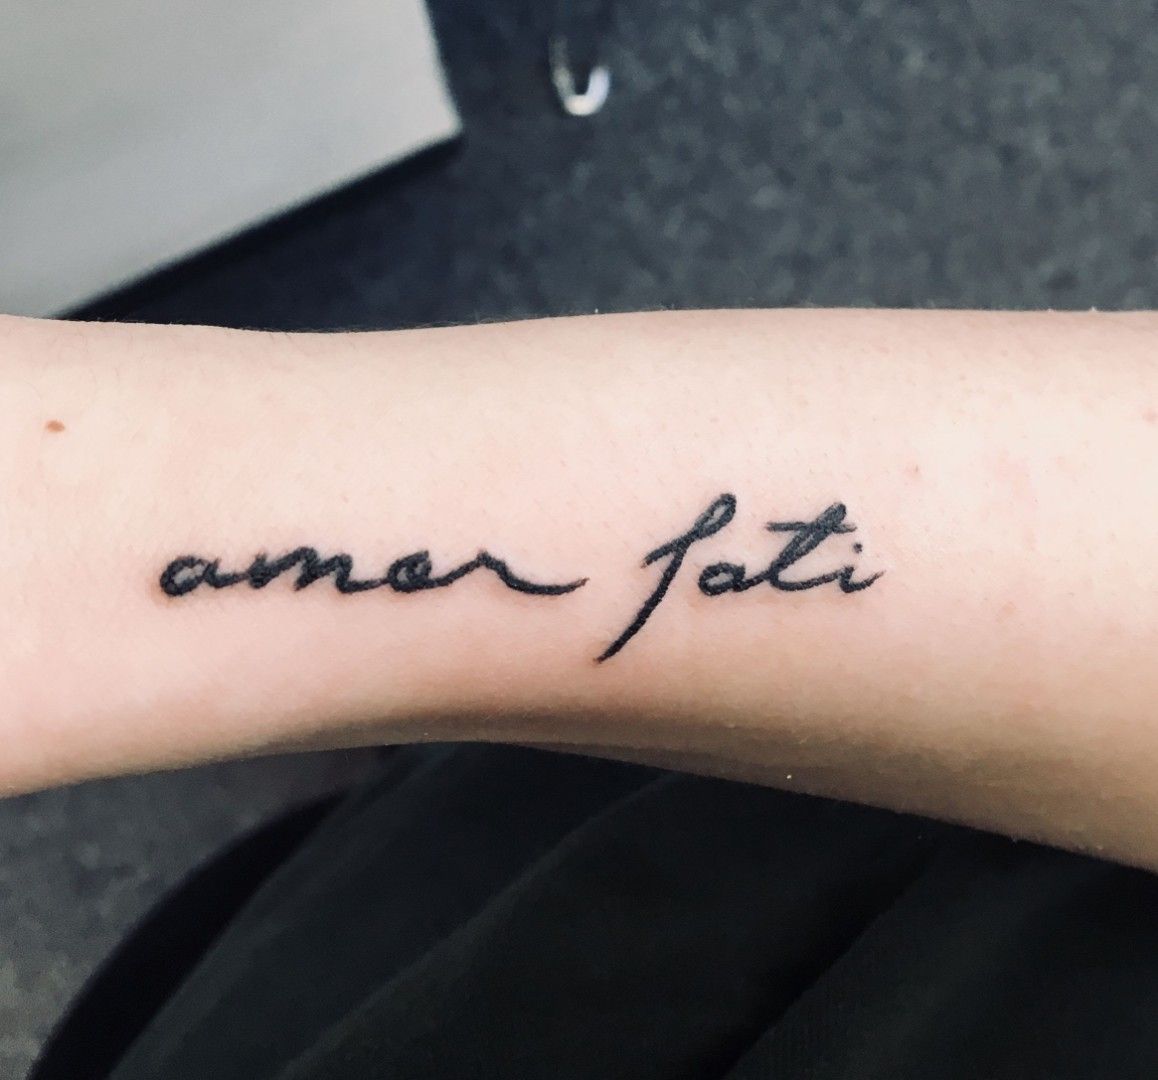 Tattoo tagged with jing small latin amor fati languages tiny love  quote love ifttt little typewriter font wrist latin tattoo quotes  font lettering quotes  inkedappcom